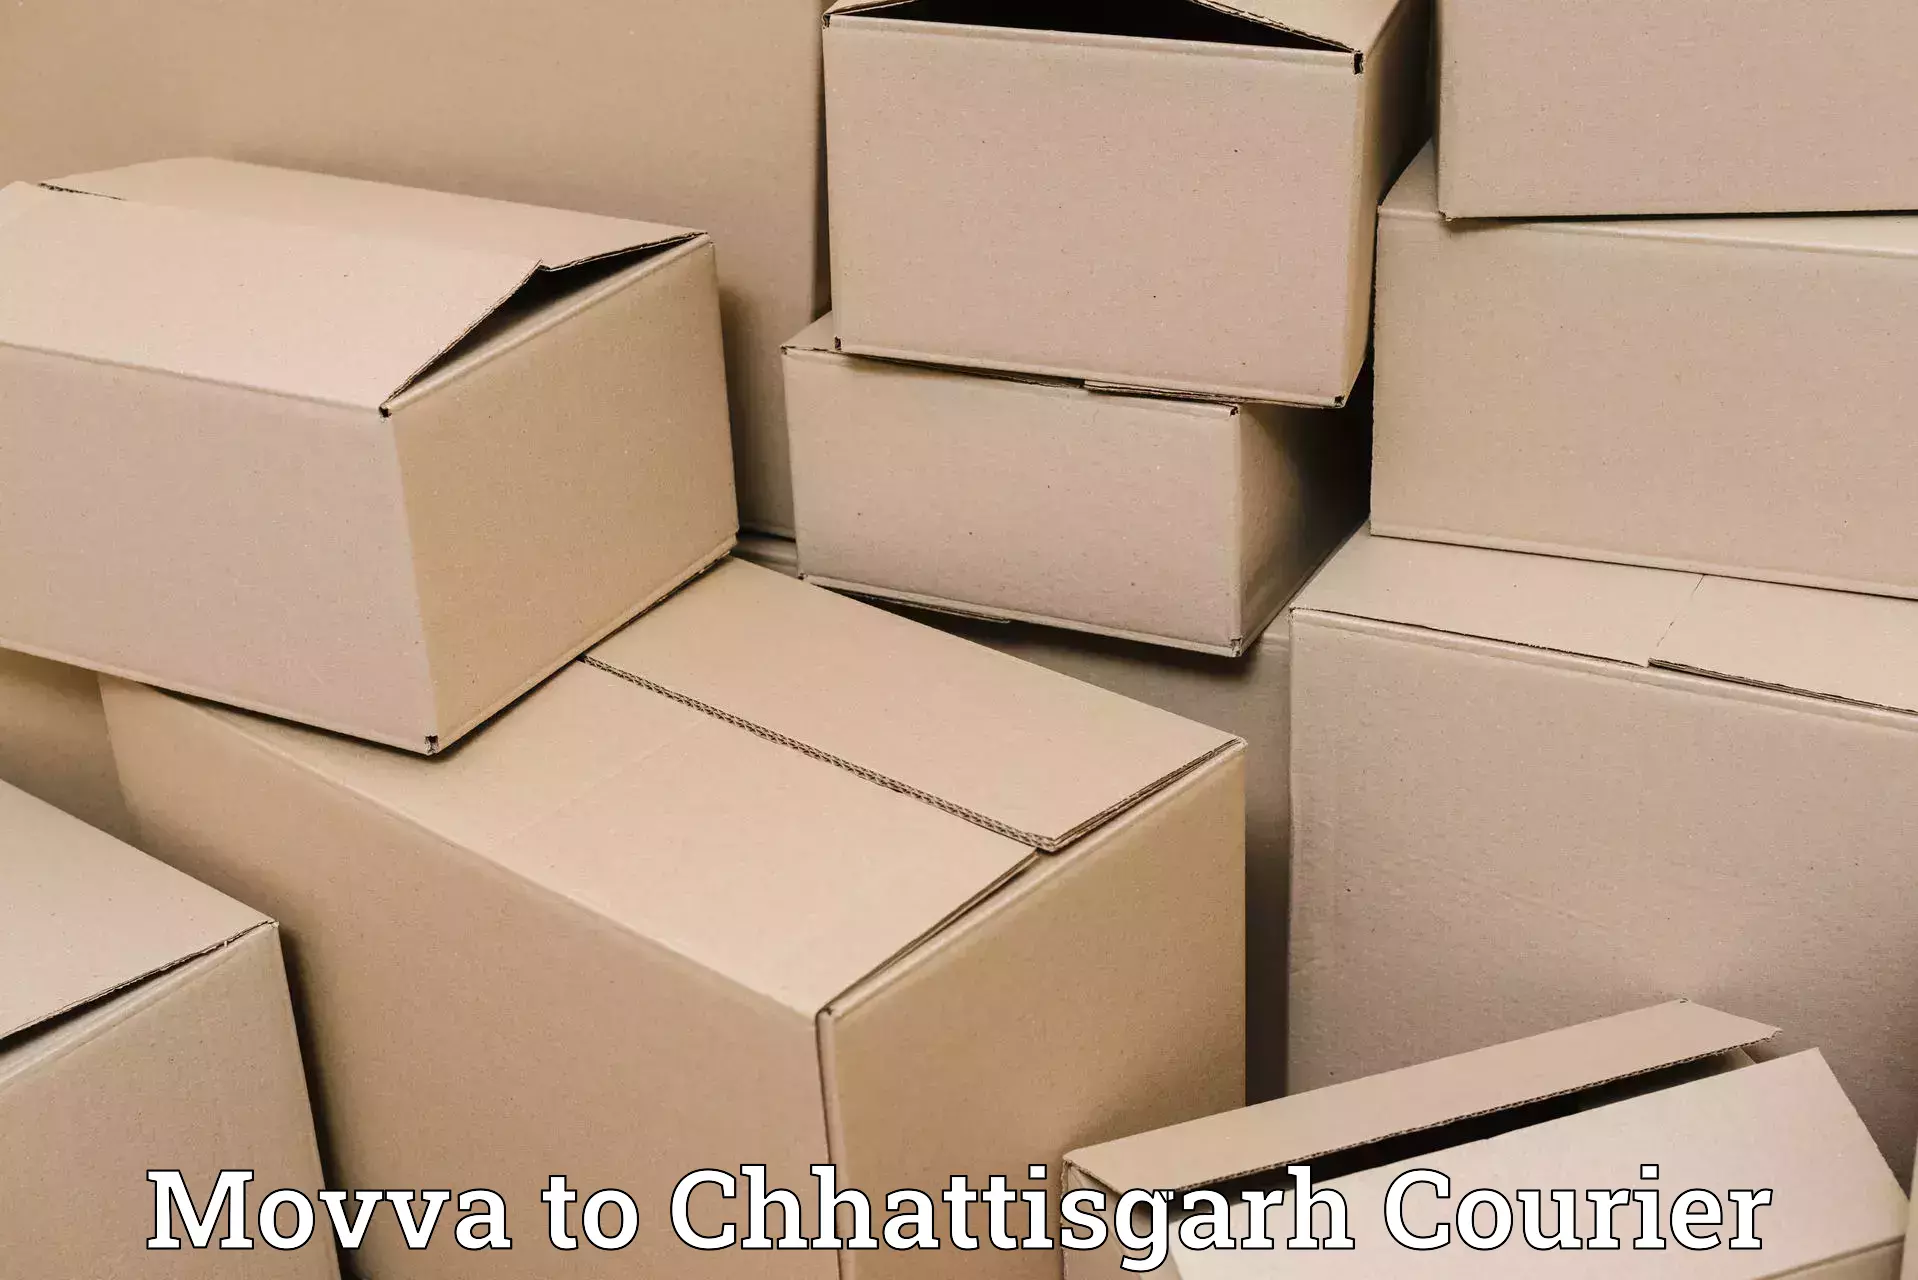 Large package courier Movva to Rajnandgaon